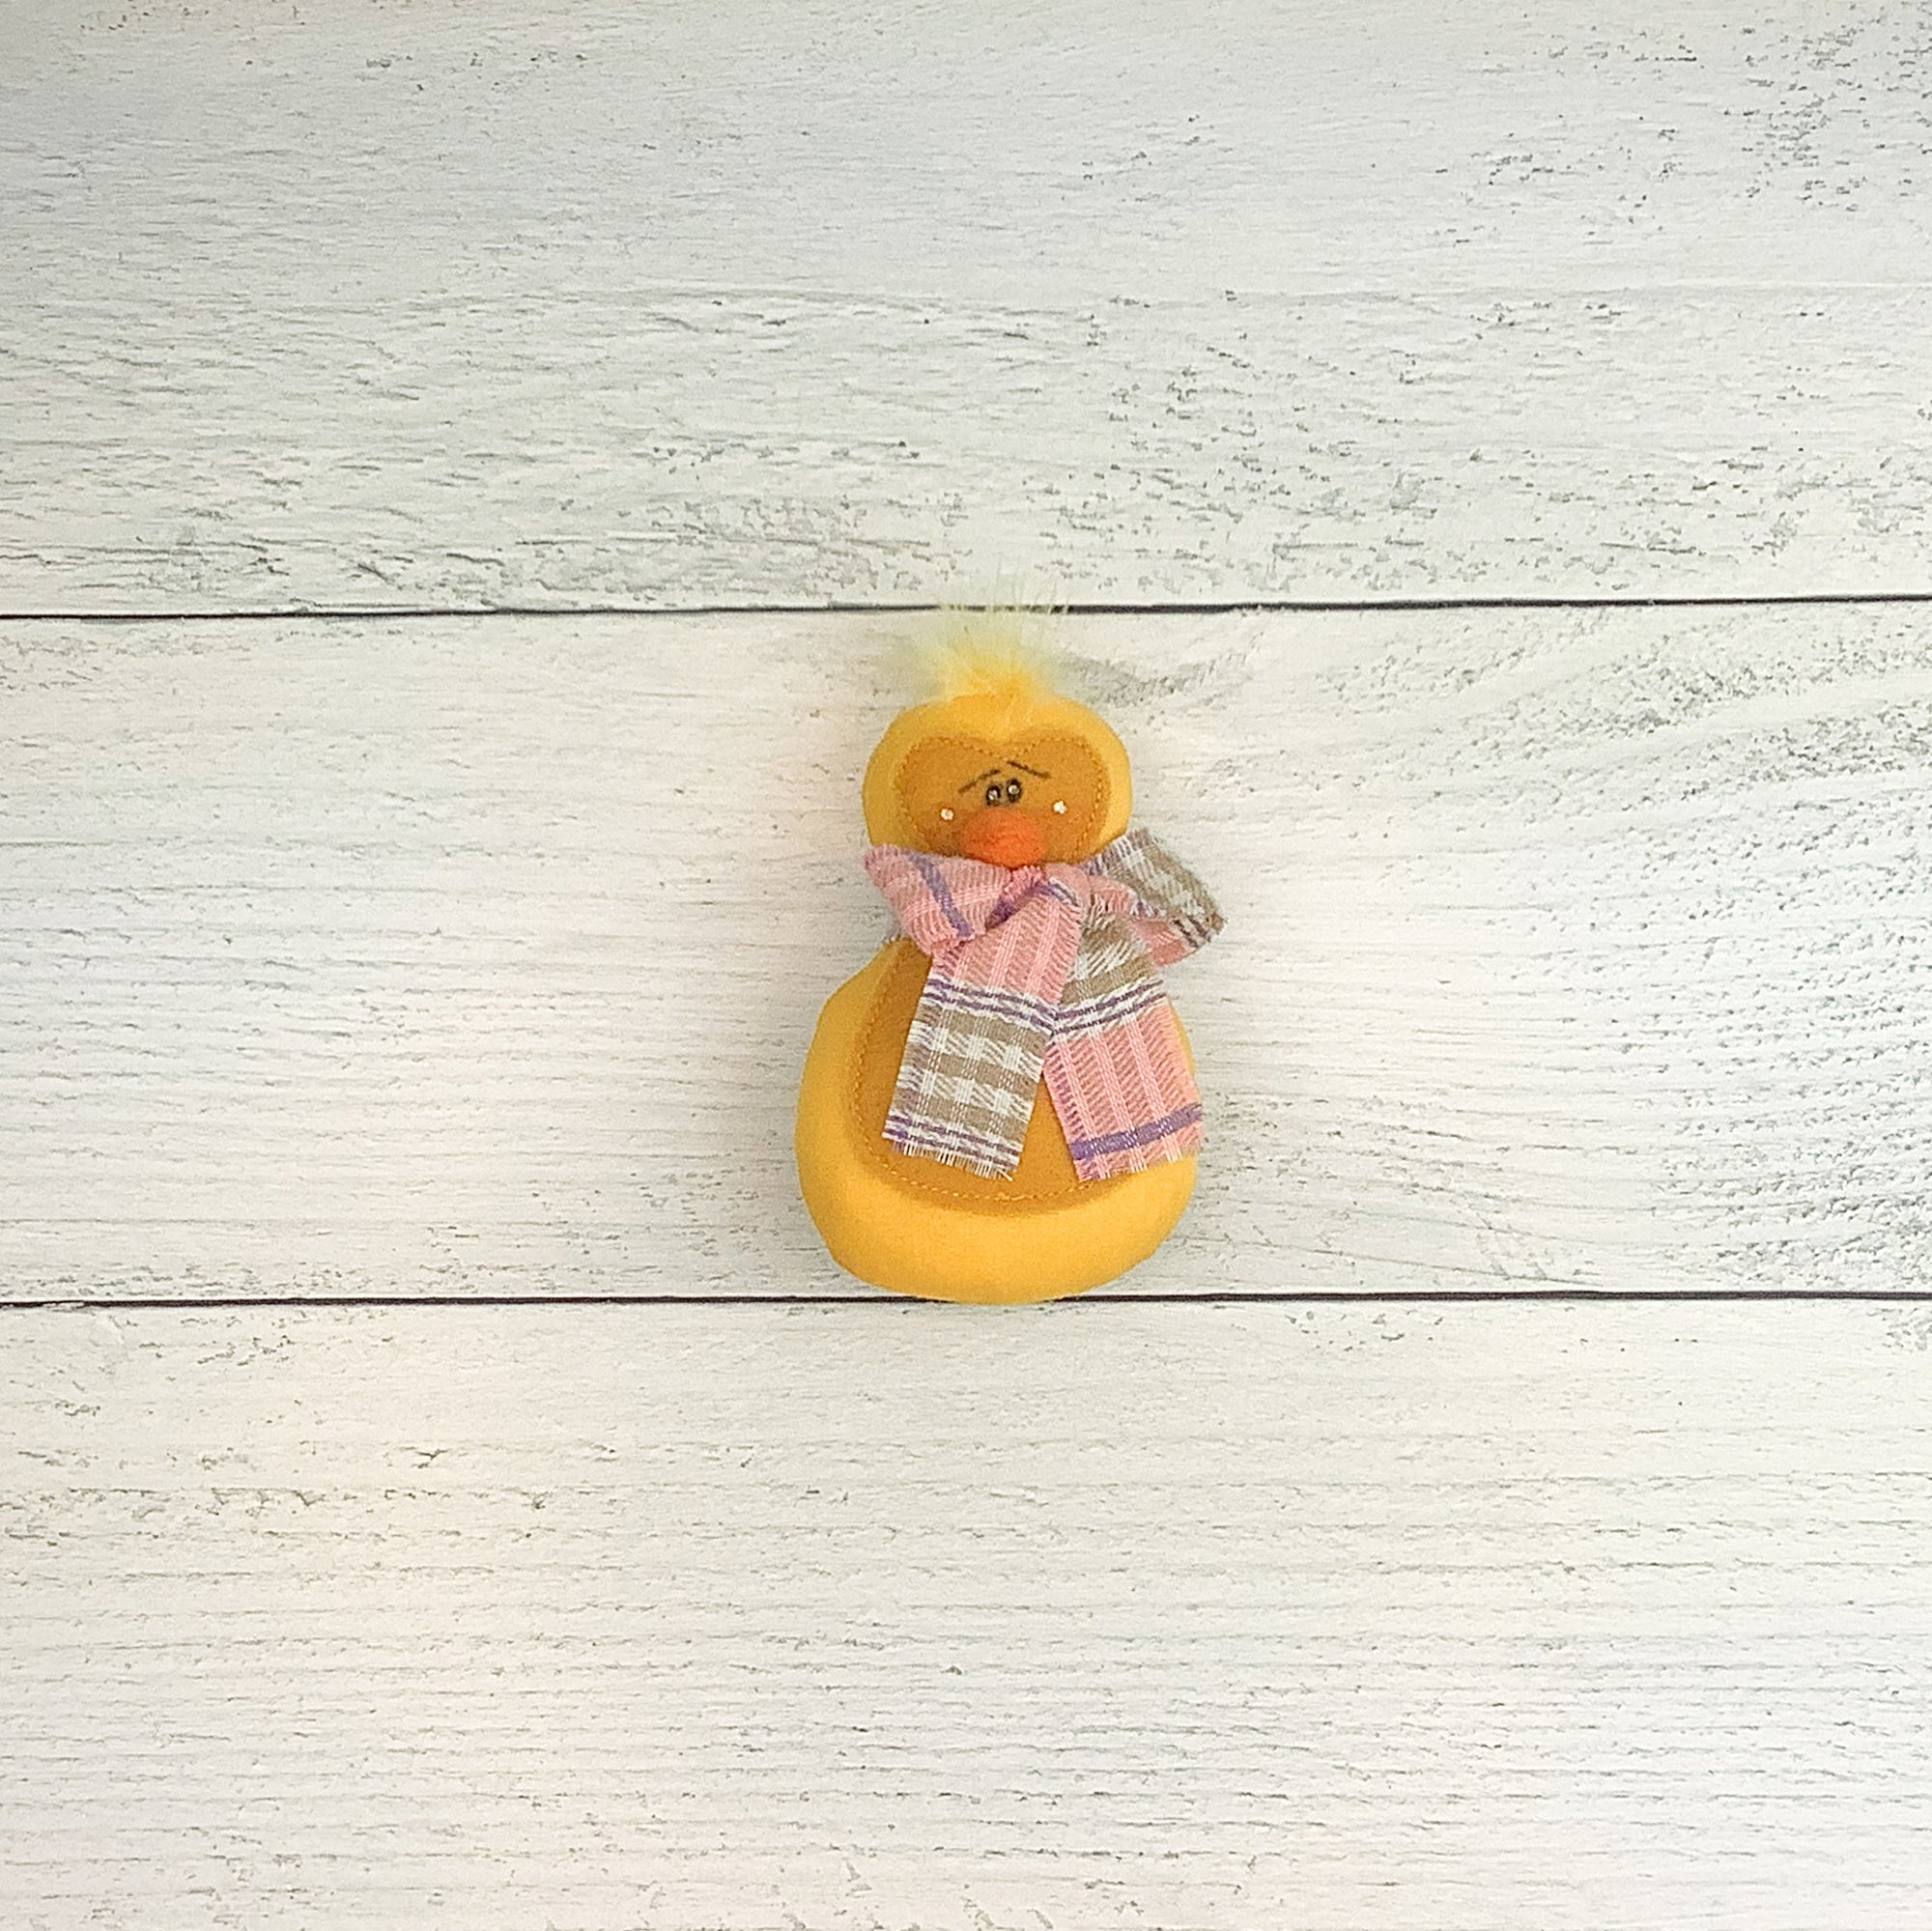 Cricket the Chicklet Small Ornament - Whimsical Primitive Textile Art: Handmade Soft Sculpture Collectible Baby Chick by Honey and Me, Inc™